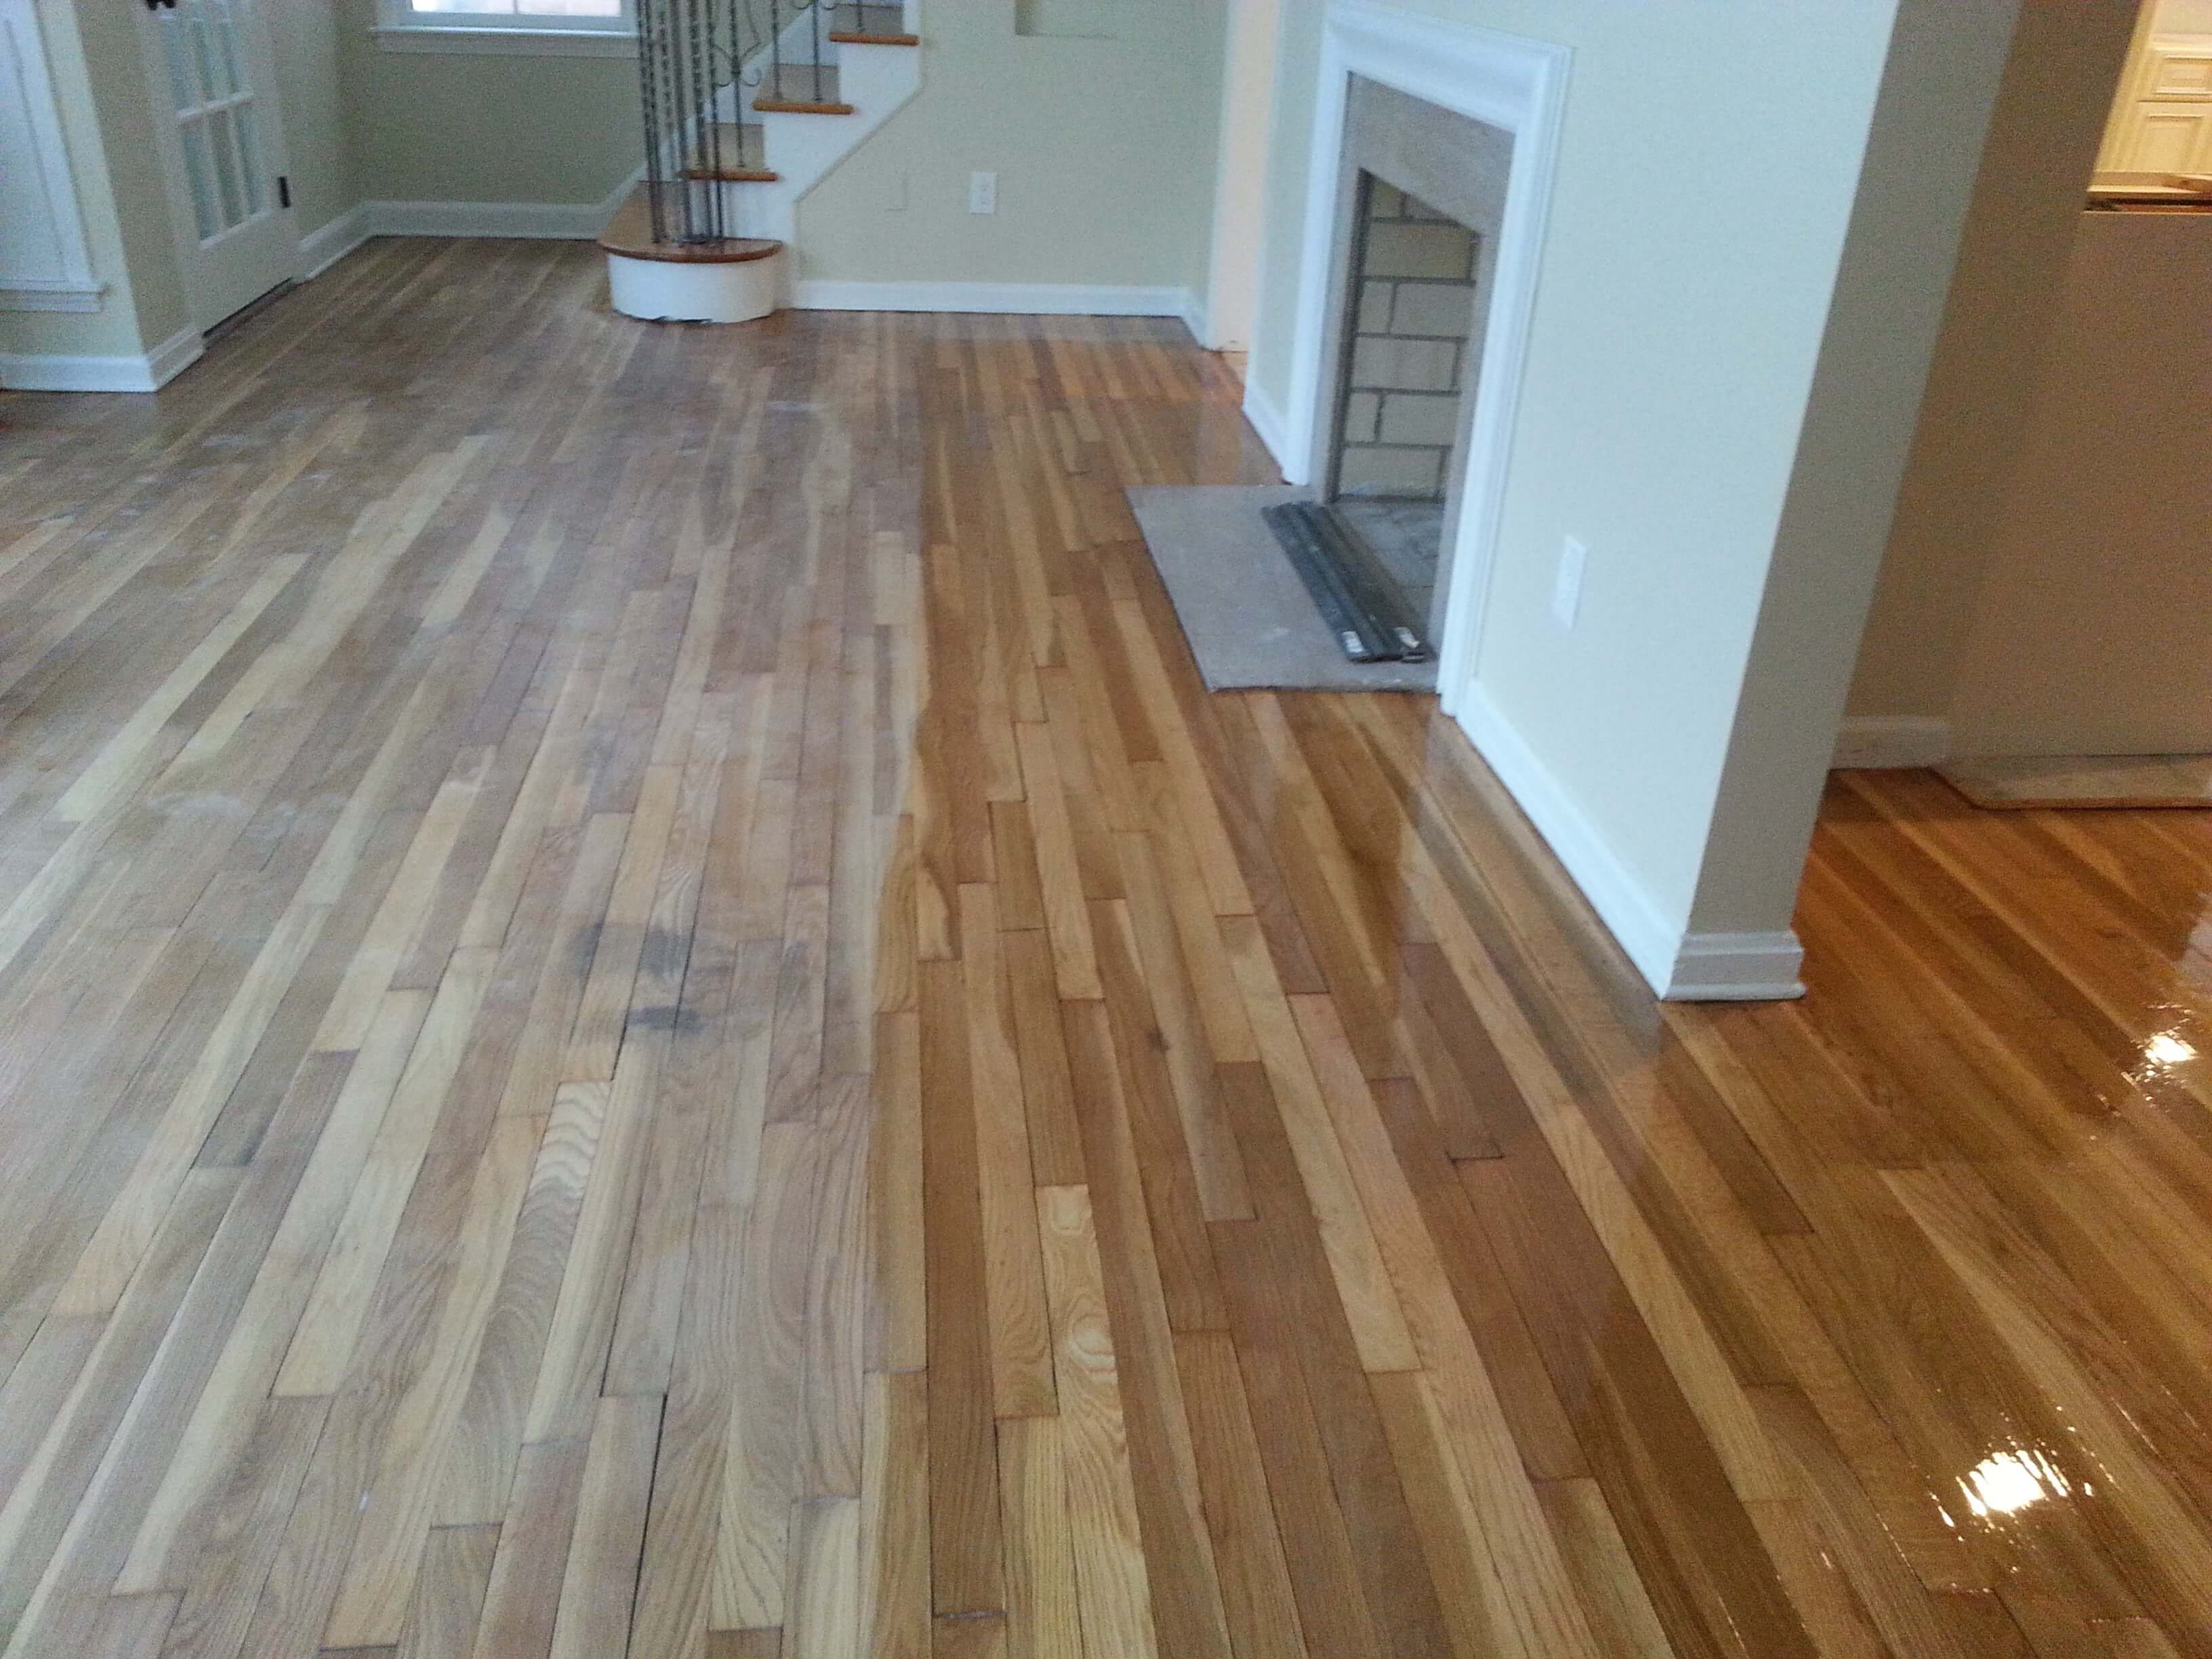 a picture showing the Fabulous Floors Atlanta resurfacing process.